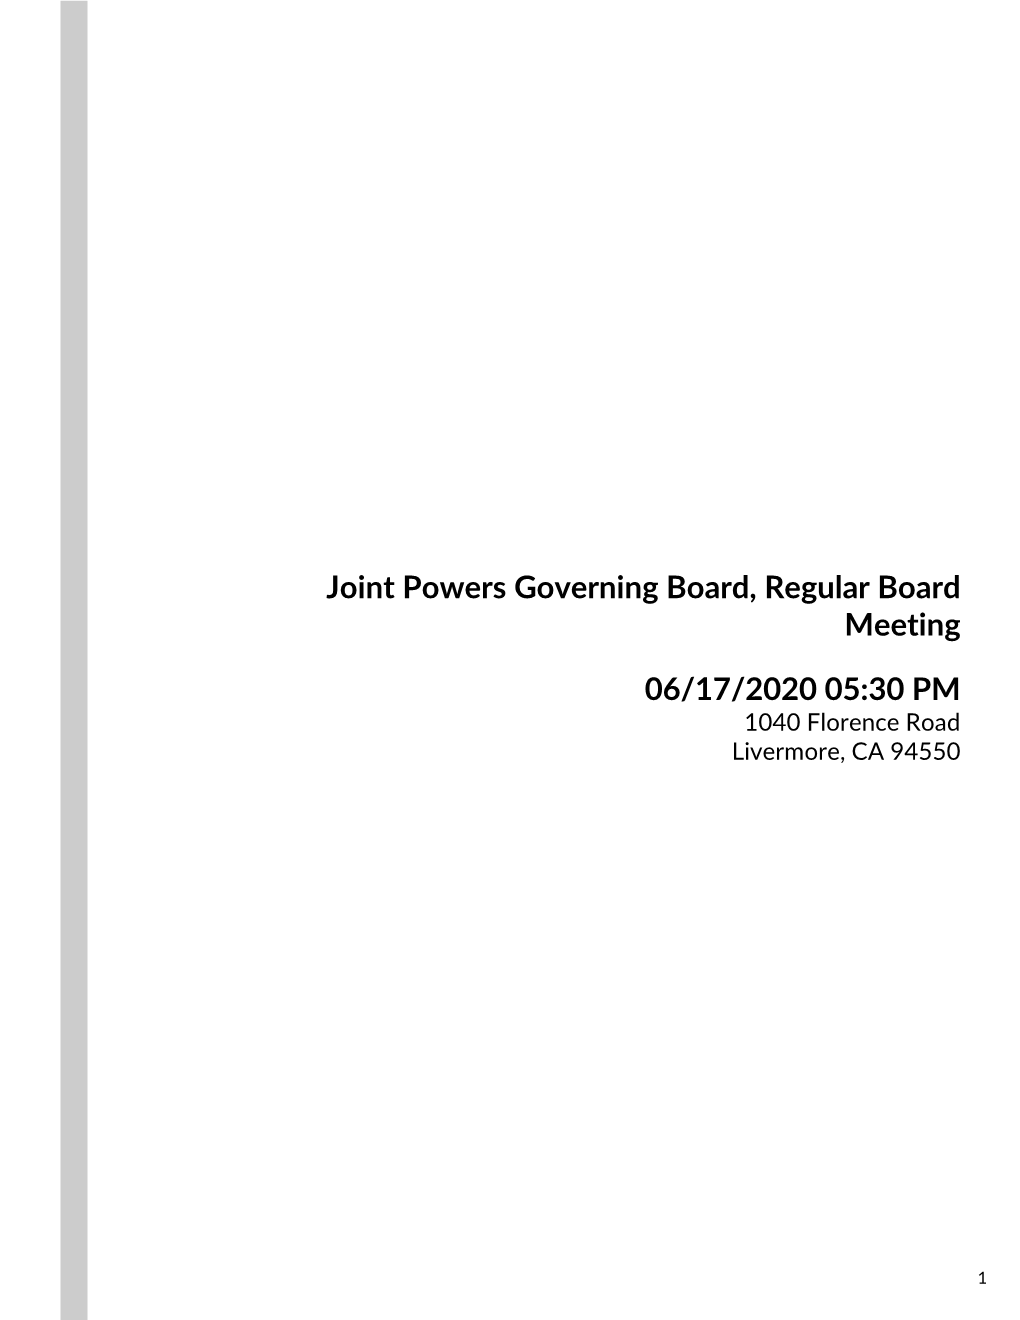 Joint Powers Governing Board, Regular Board Meeting 06/17/2020 05:30 PM 1040 Florence Road Livermore, CA 94550